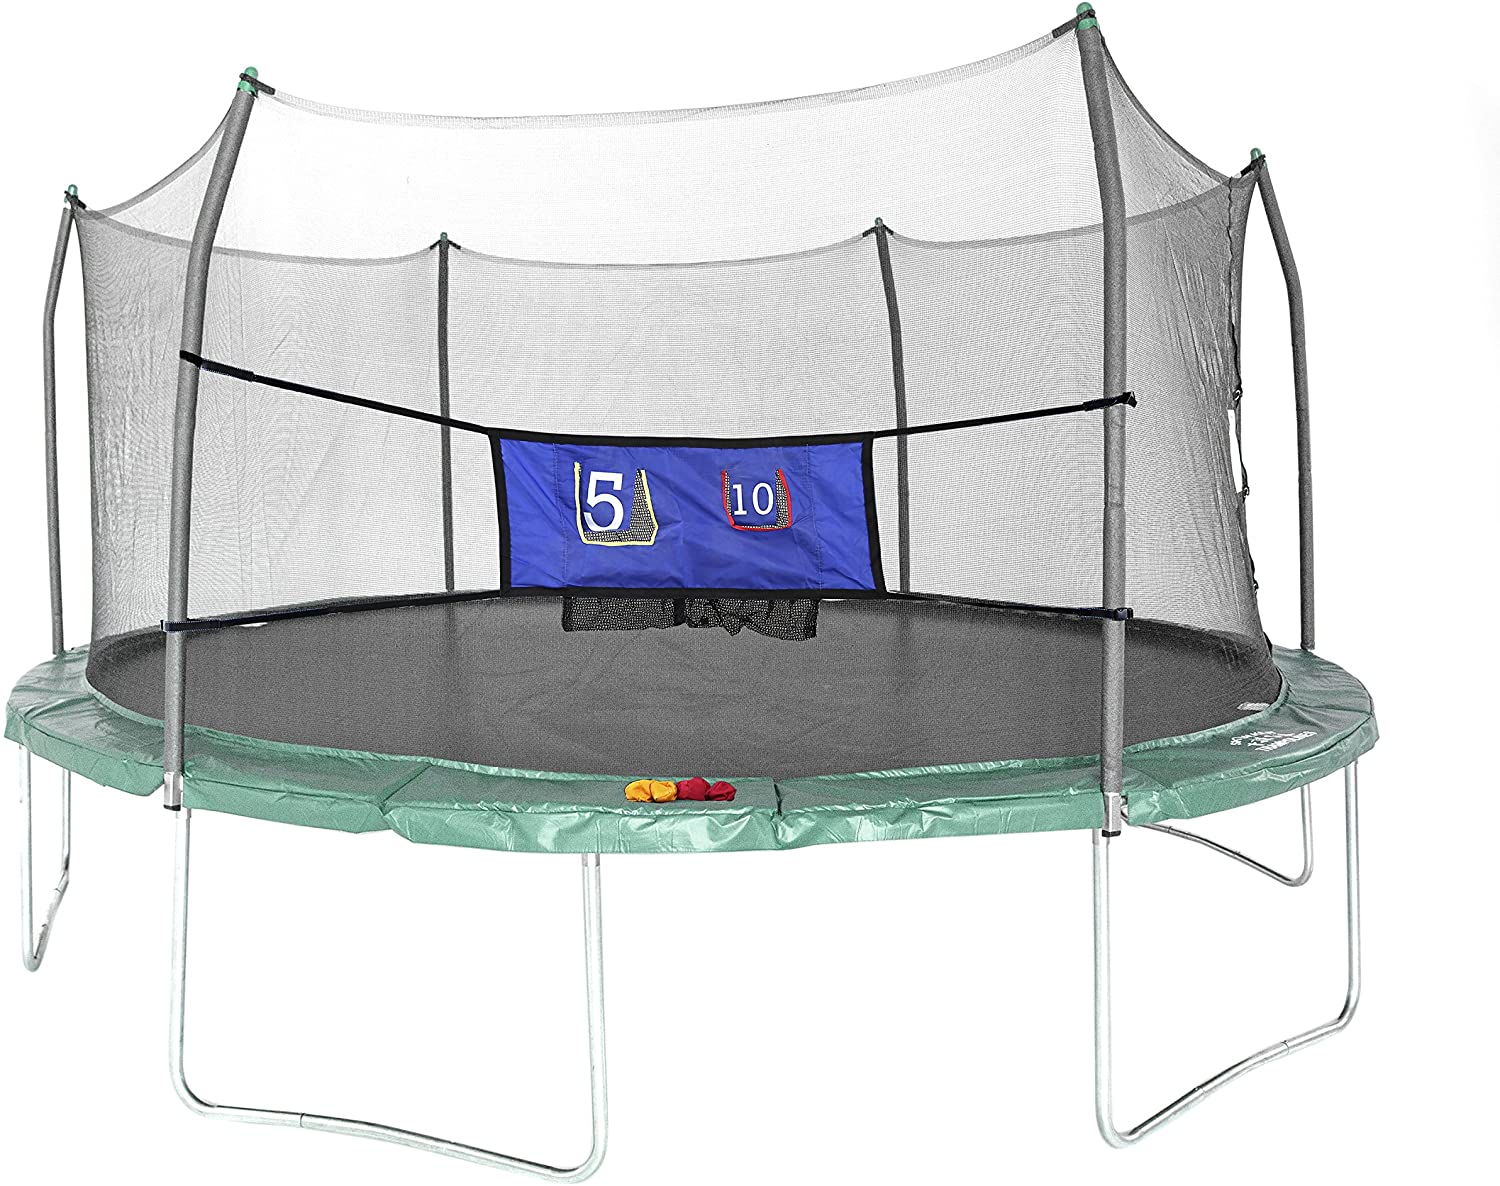 Skywalker 16 Foot Green Oval Trampoline with Enclosure and Double Toss Game